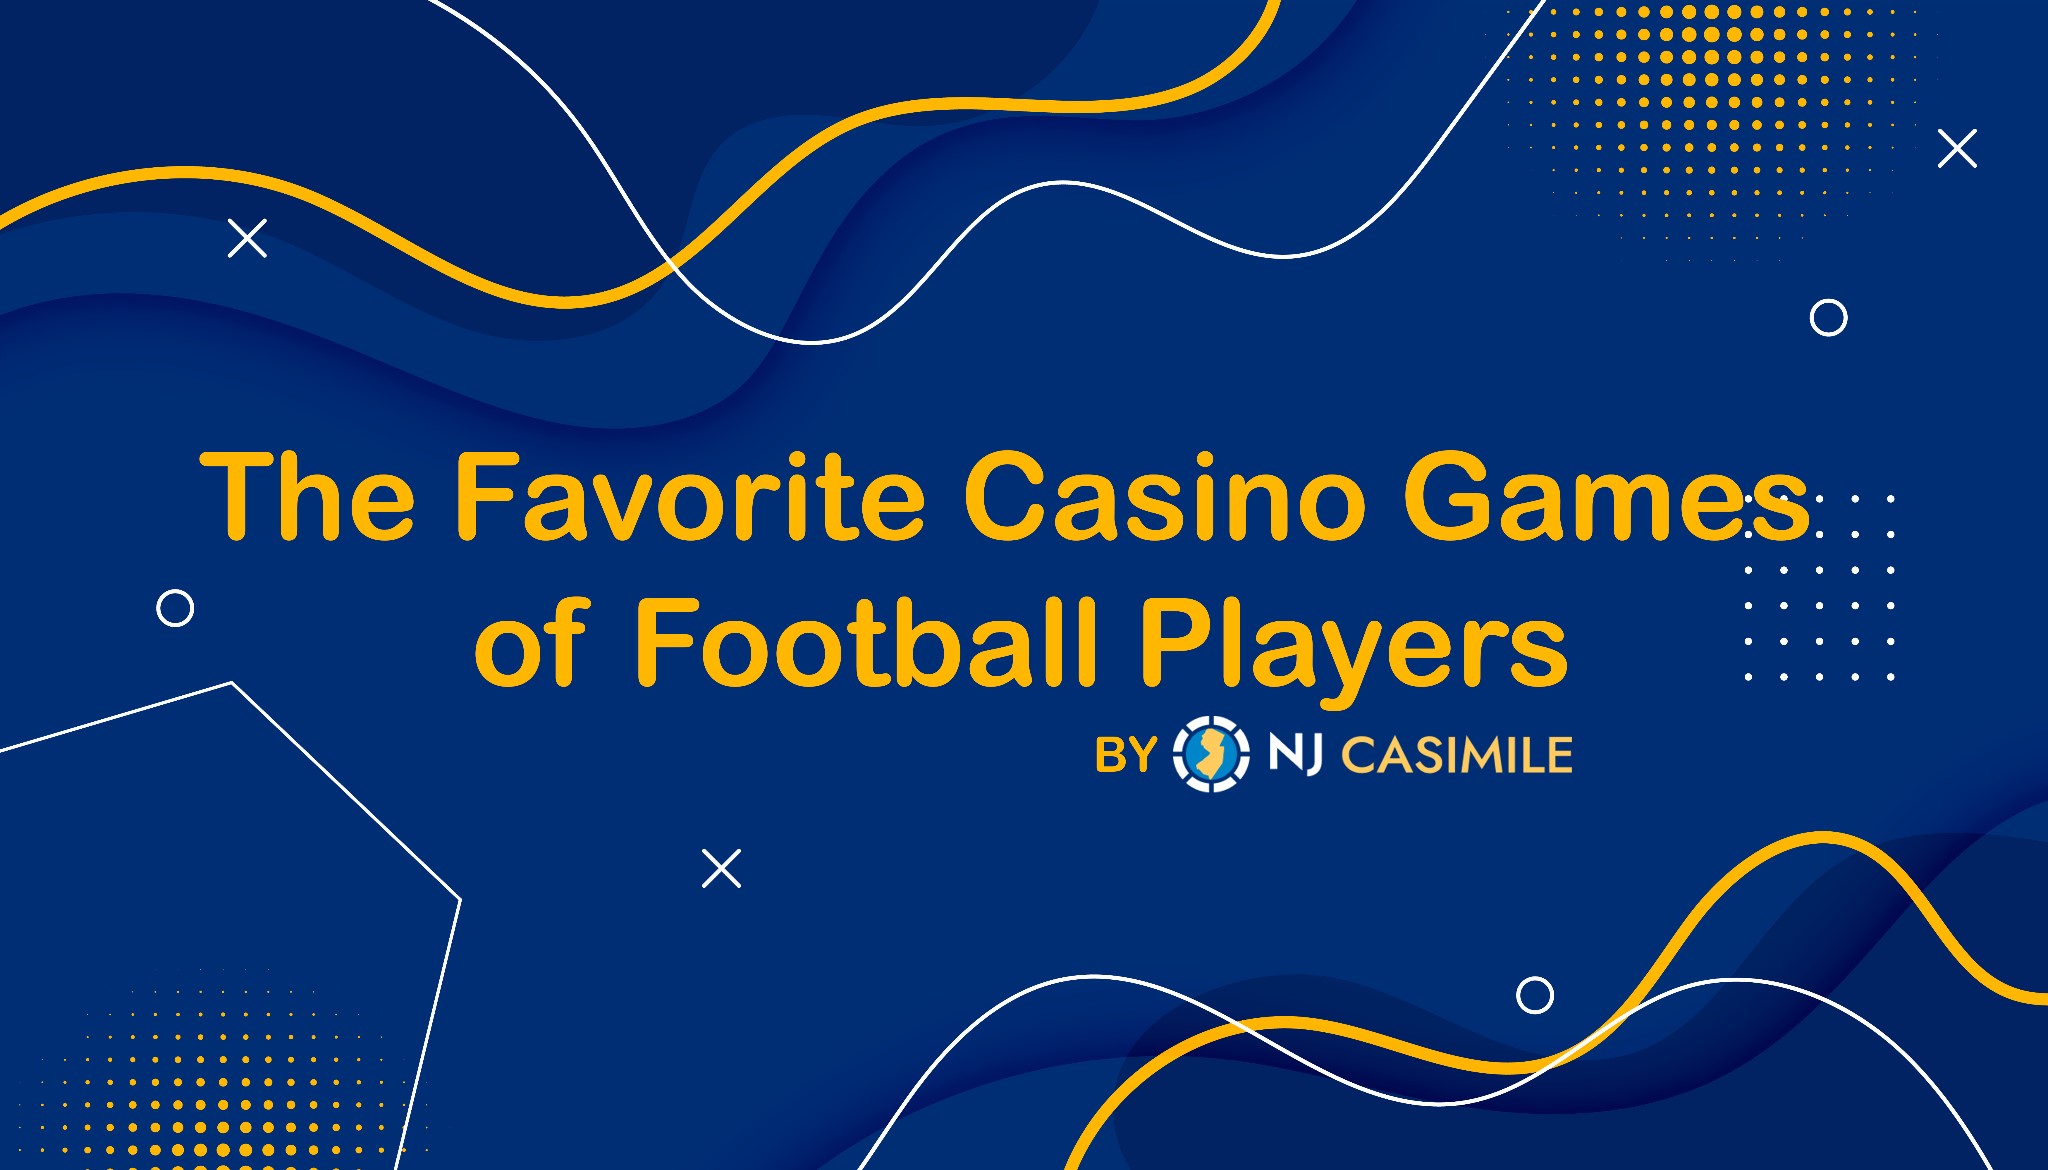 The Favorite Casino Games of Football Players